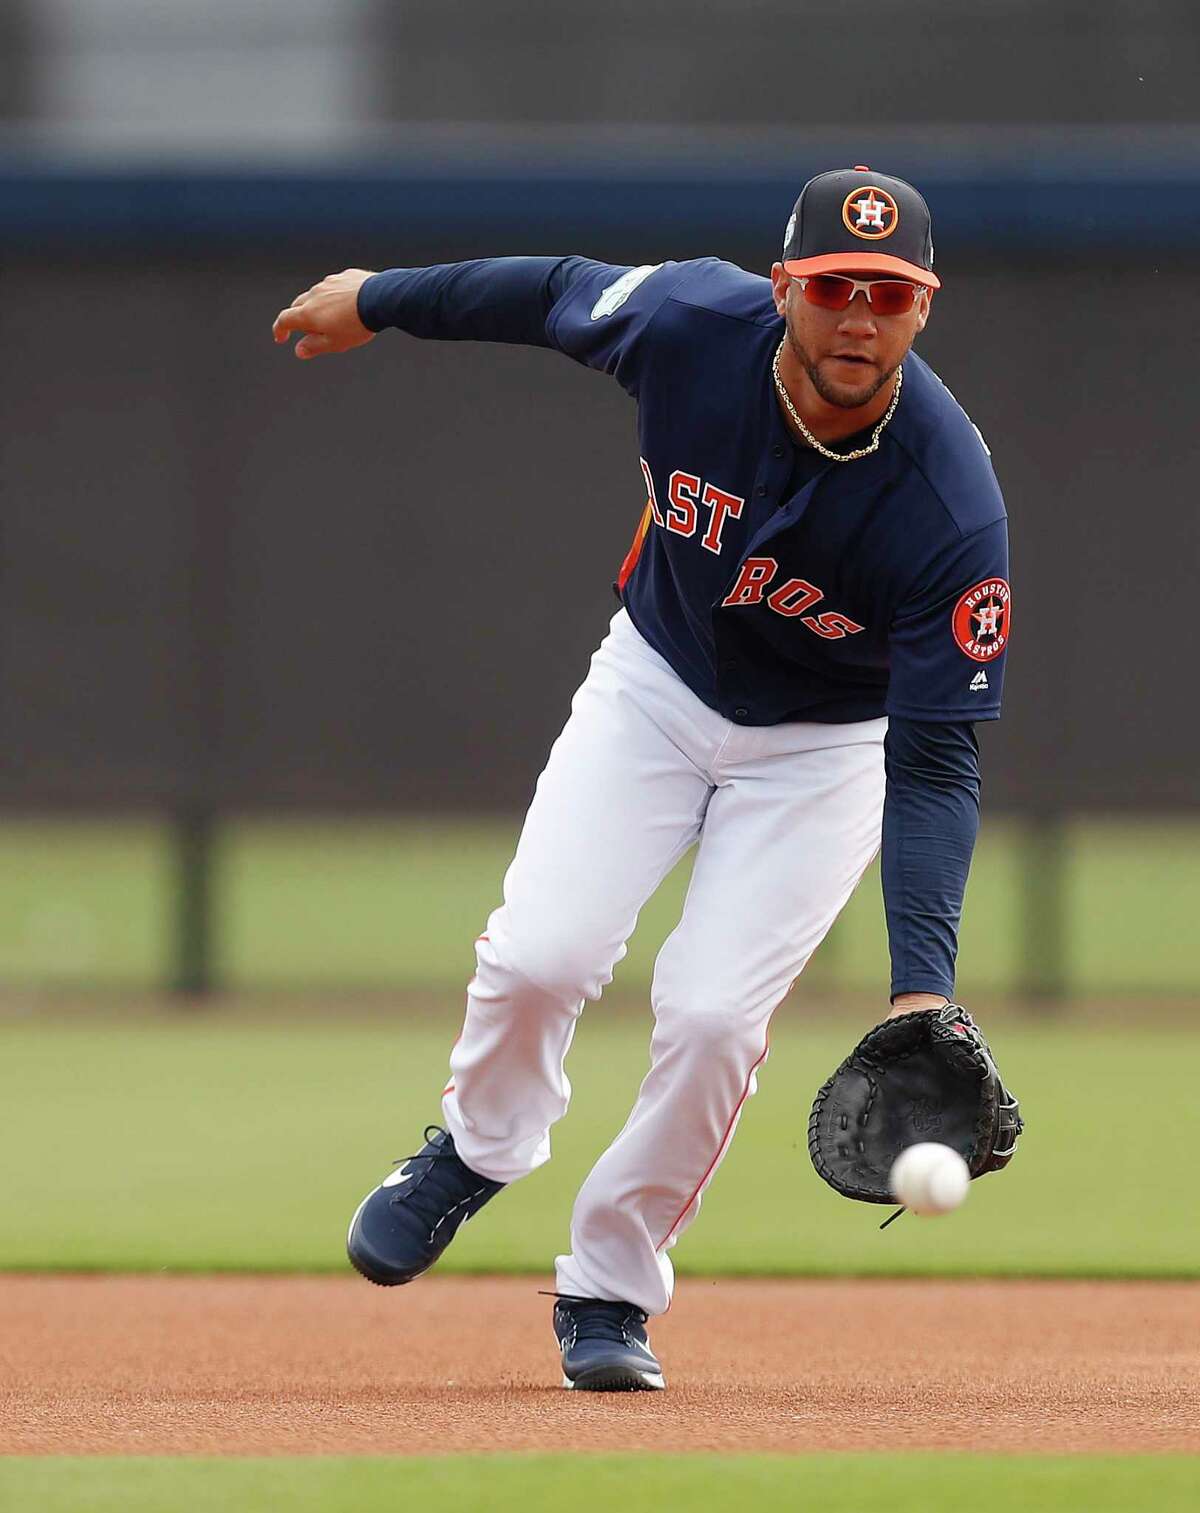 Houston Astros Yulieski Gurriel (10) catches a ground ball at first base during spring training at The Ballpark of the Palm Beaches, in West Palm Beach, Florida, Saturday, February 18, 2017. ( Karen Warren / Houston Chronicle )